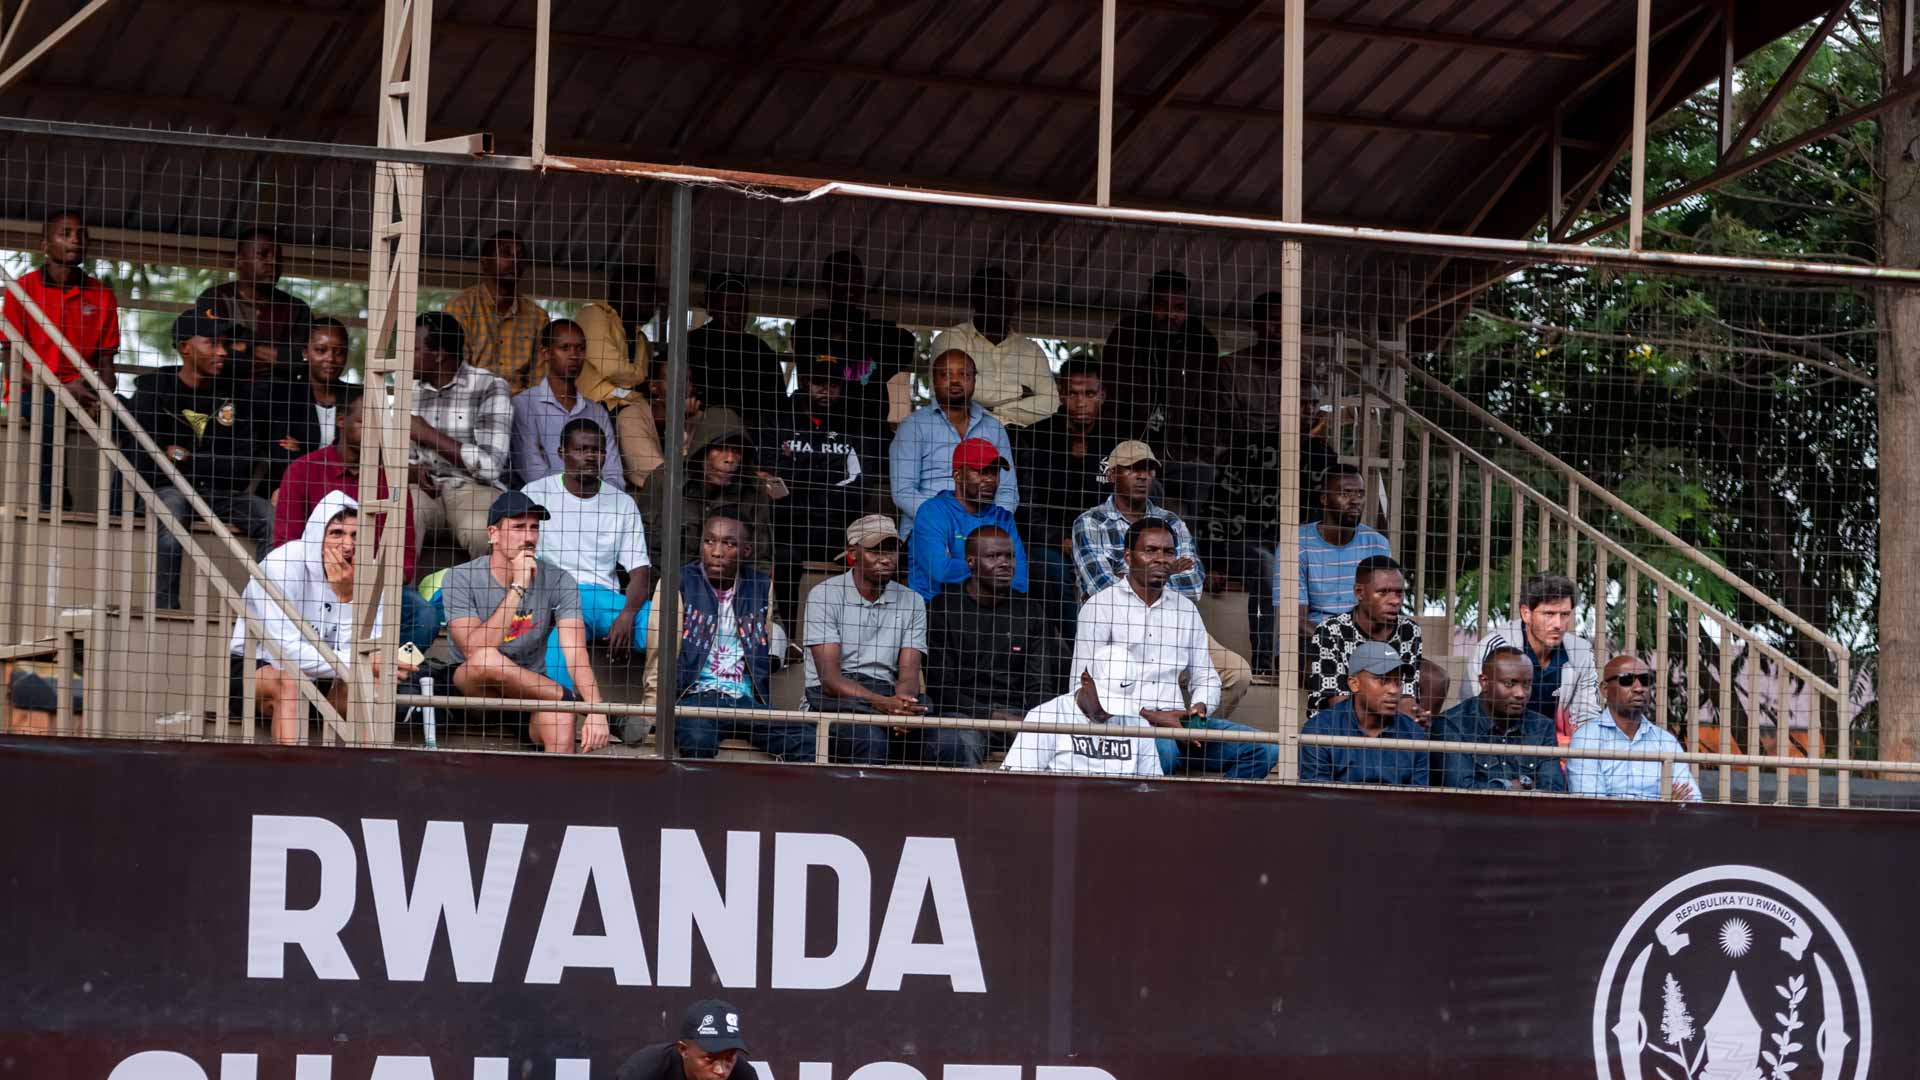 Spectators fill the stands at the Kicukiro Ecology Tennis Club.